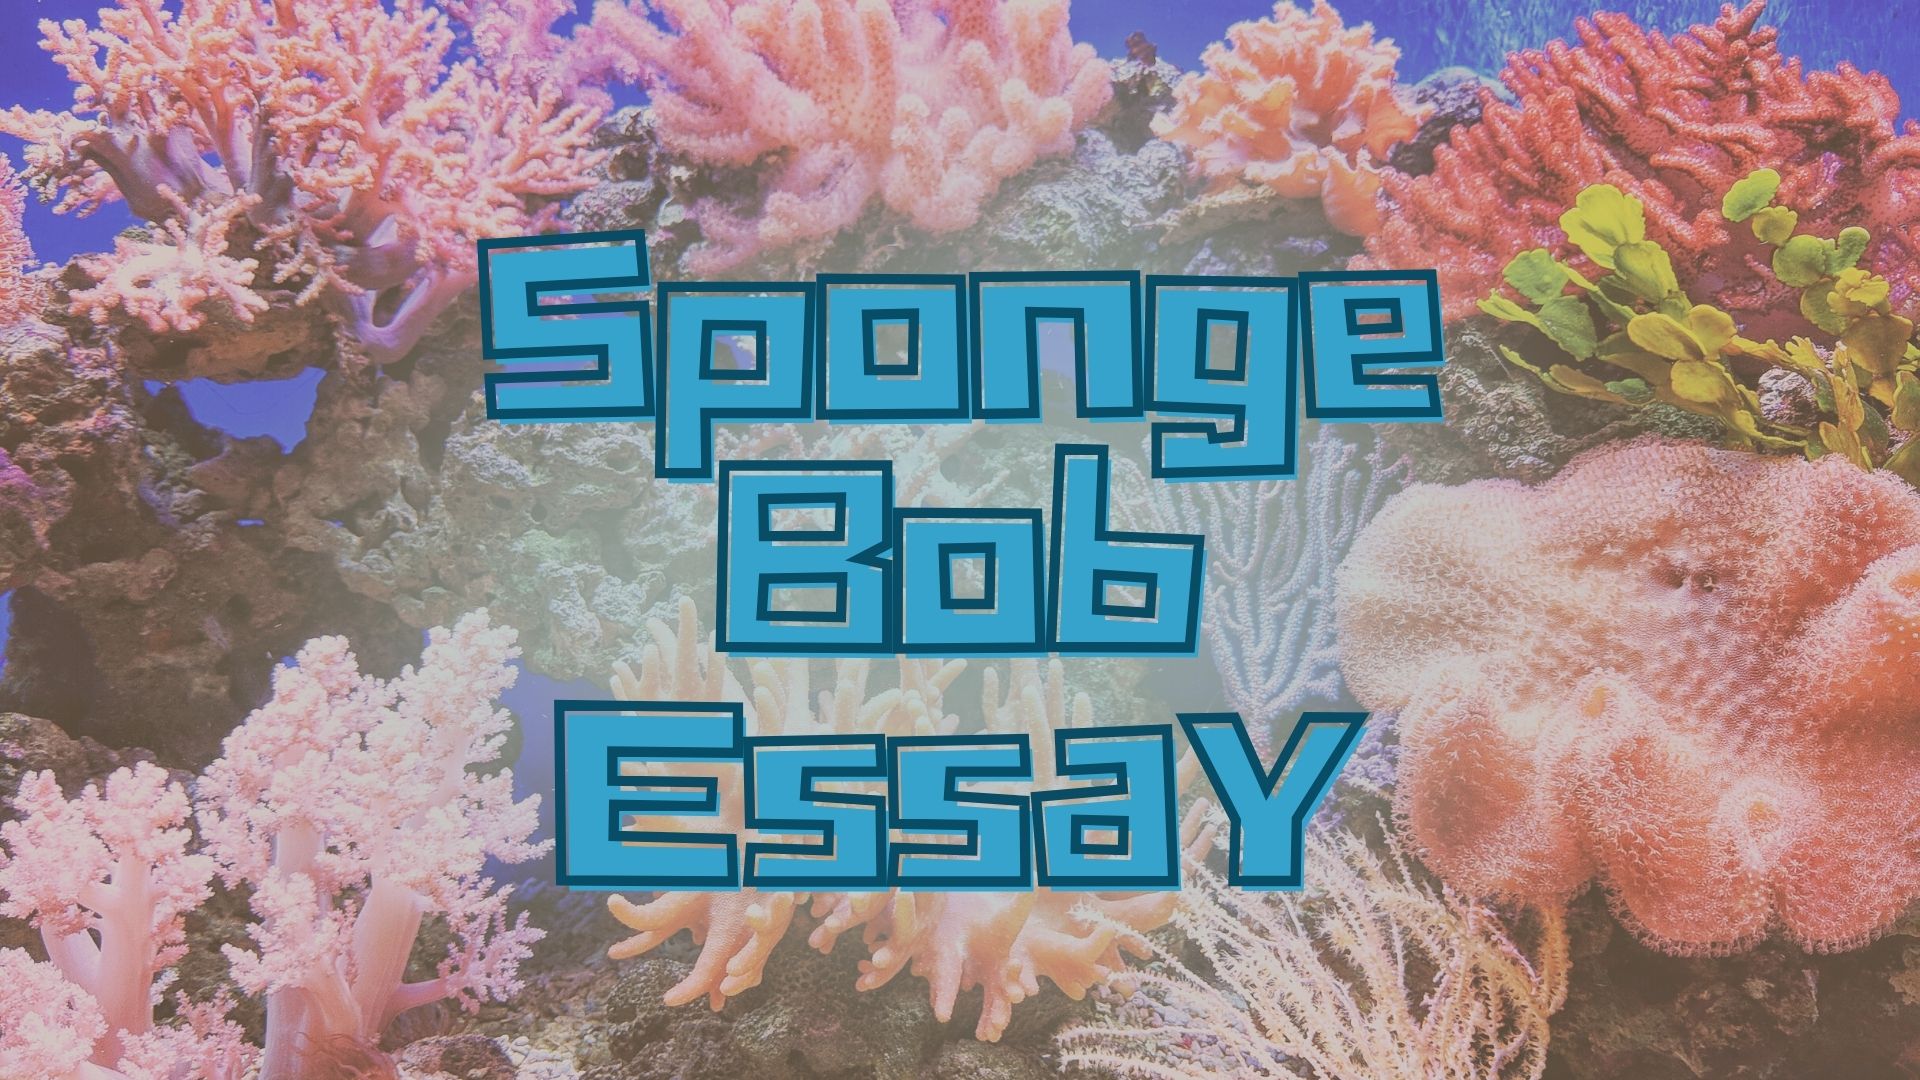 Spongebob Essay: Your Guide With Topic Suggestions